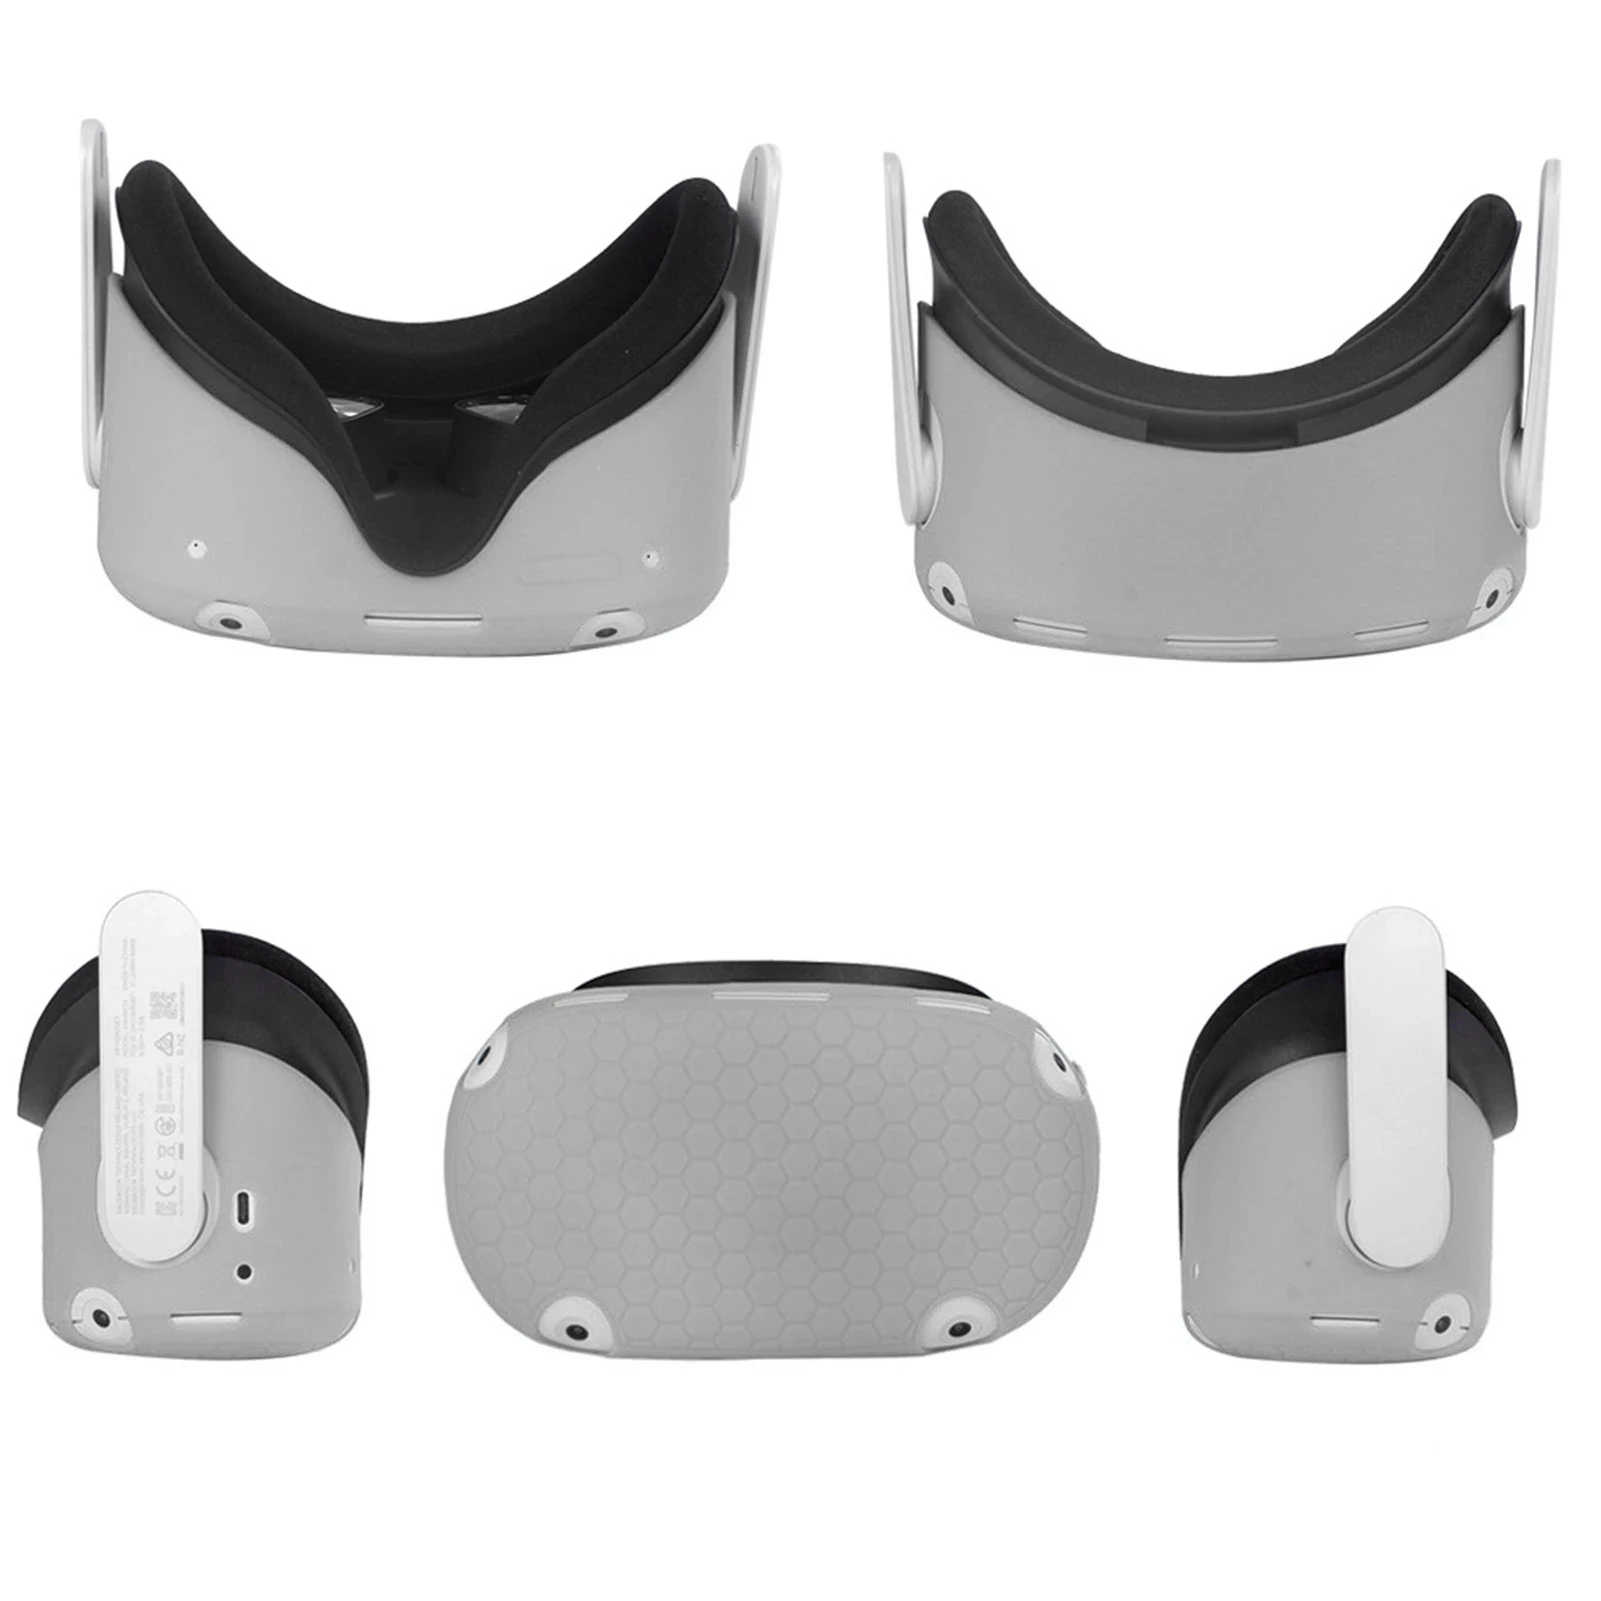 Find Hibloks Silicone Protective Cover Shell Case Helmet Protection Front Cover for Oculus Quest 2 VR Accessories Headset Head Cover Anti Scratches for Sale on Gipsybee.com